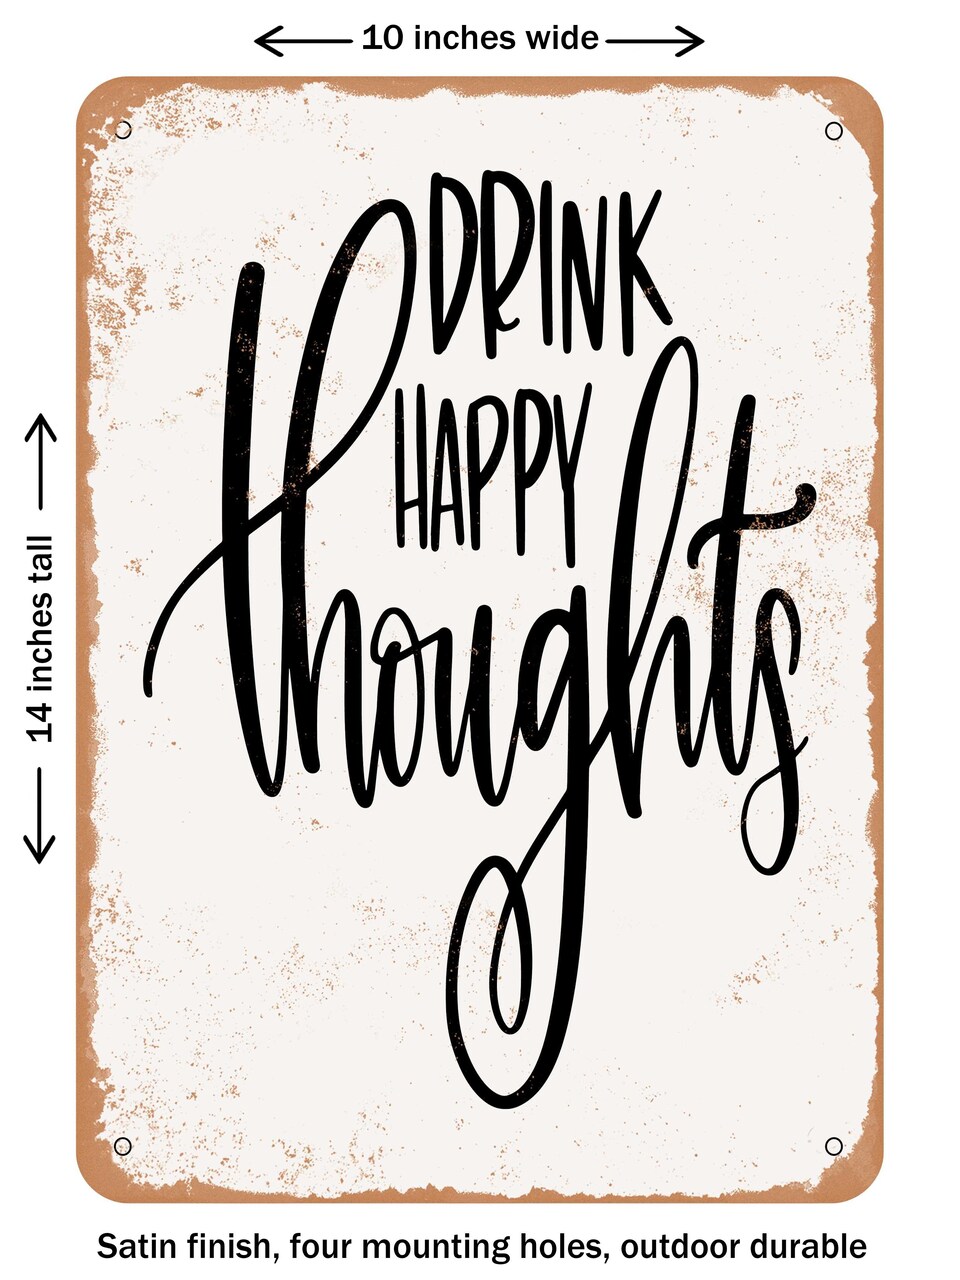 DECORATIVE METAL SIGN - Drink Happy Thoughts - 6  - Vintage Rusty Look